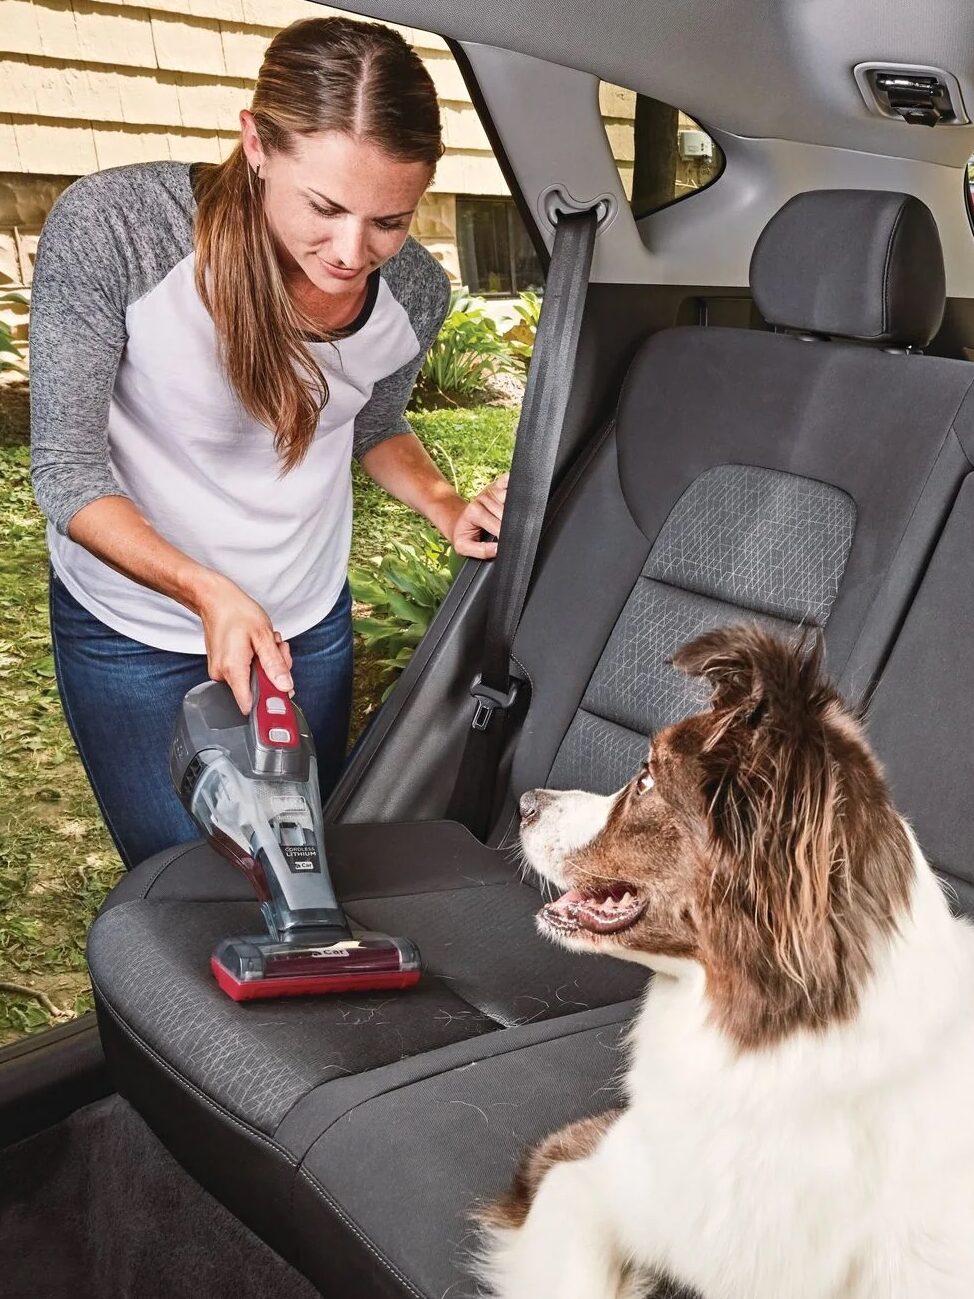 Woman using a handheld vacuum to clean the backseat of a car while a dog watches.